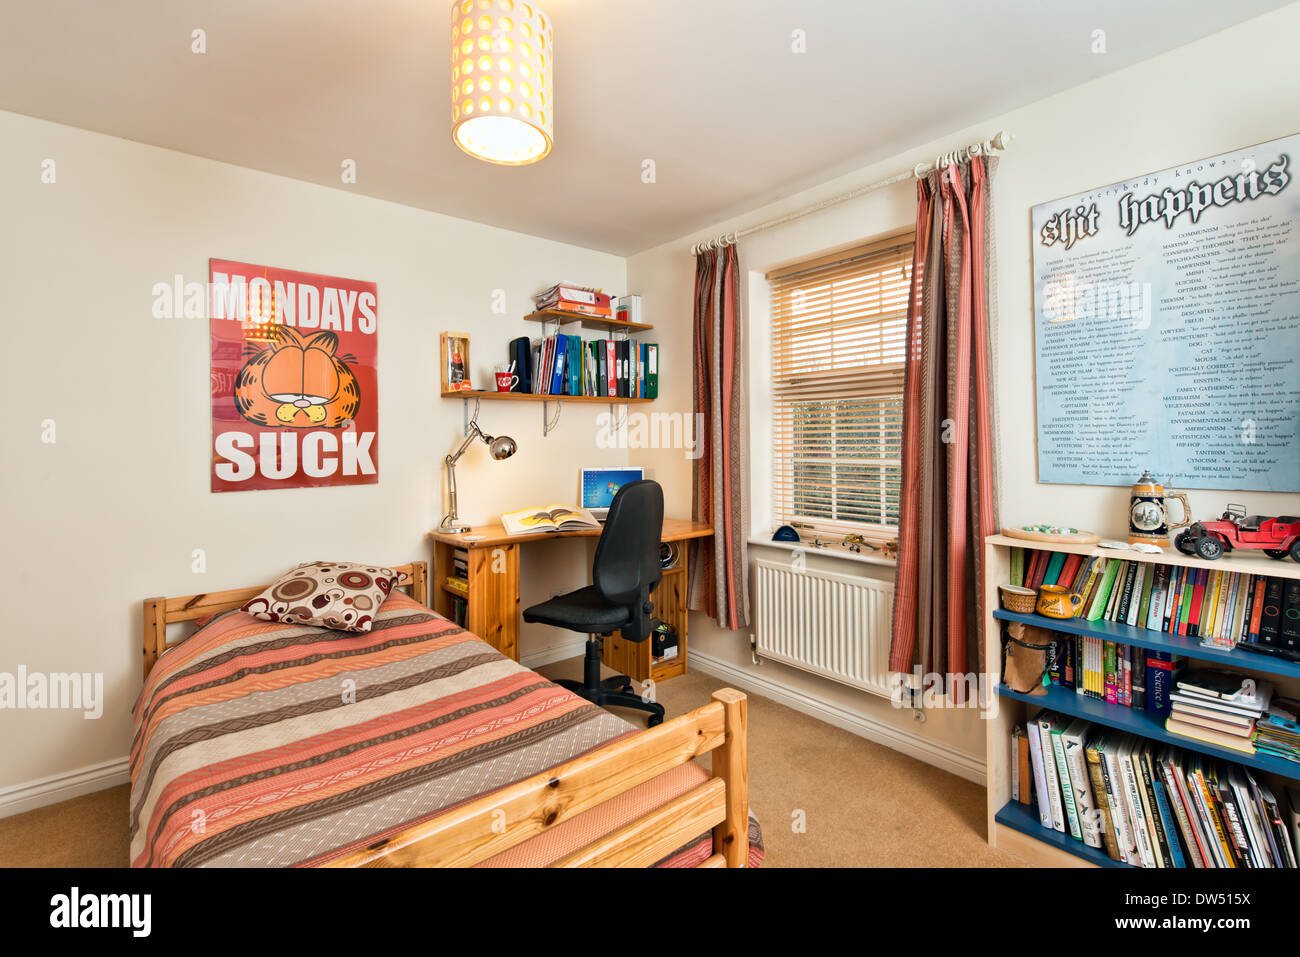 A Typical Teenage Student Bedroom Or Dorm Accommodation With Bed